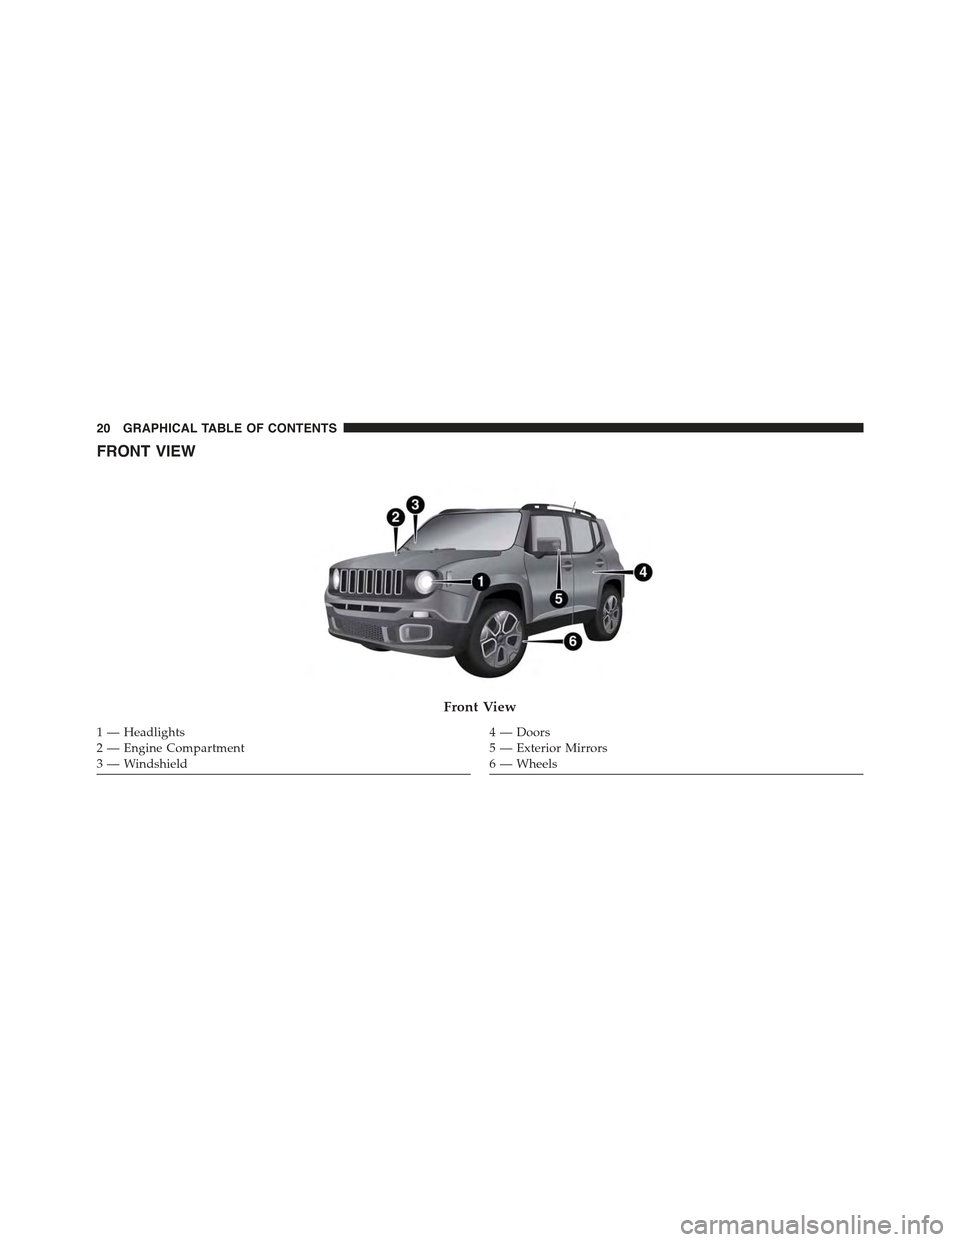 JEEP RENEGADE 2015 1.G Owners Manual FRONT VIEW
Front View
1 — Headlights2—EngineCompartment3 — Windshield
4—Doors5 — Exterior Mirrors6 — Wheels
20 GRAPHICAL TABLE OF CONTENTS 